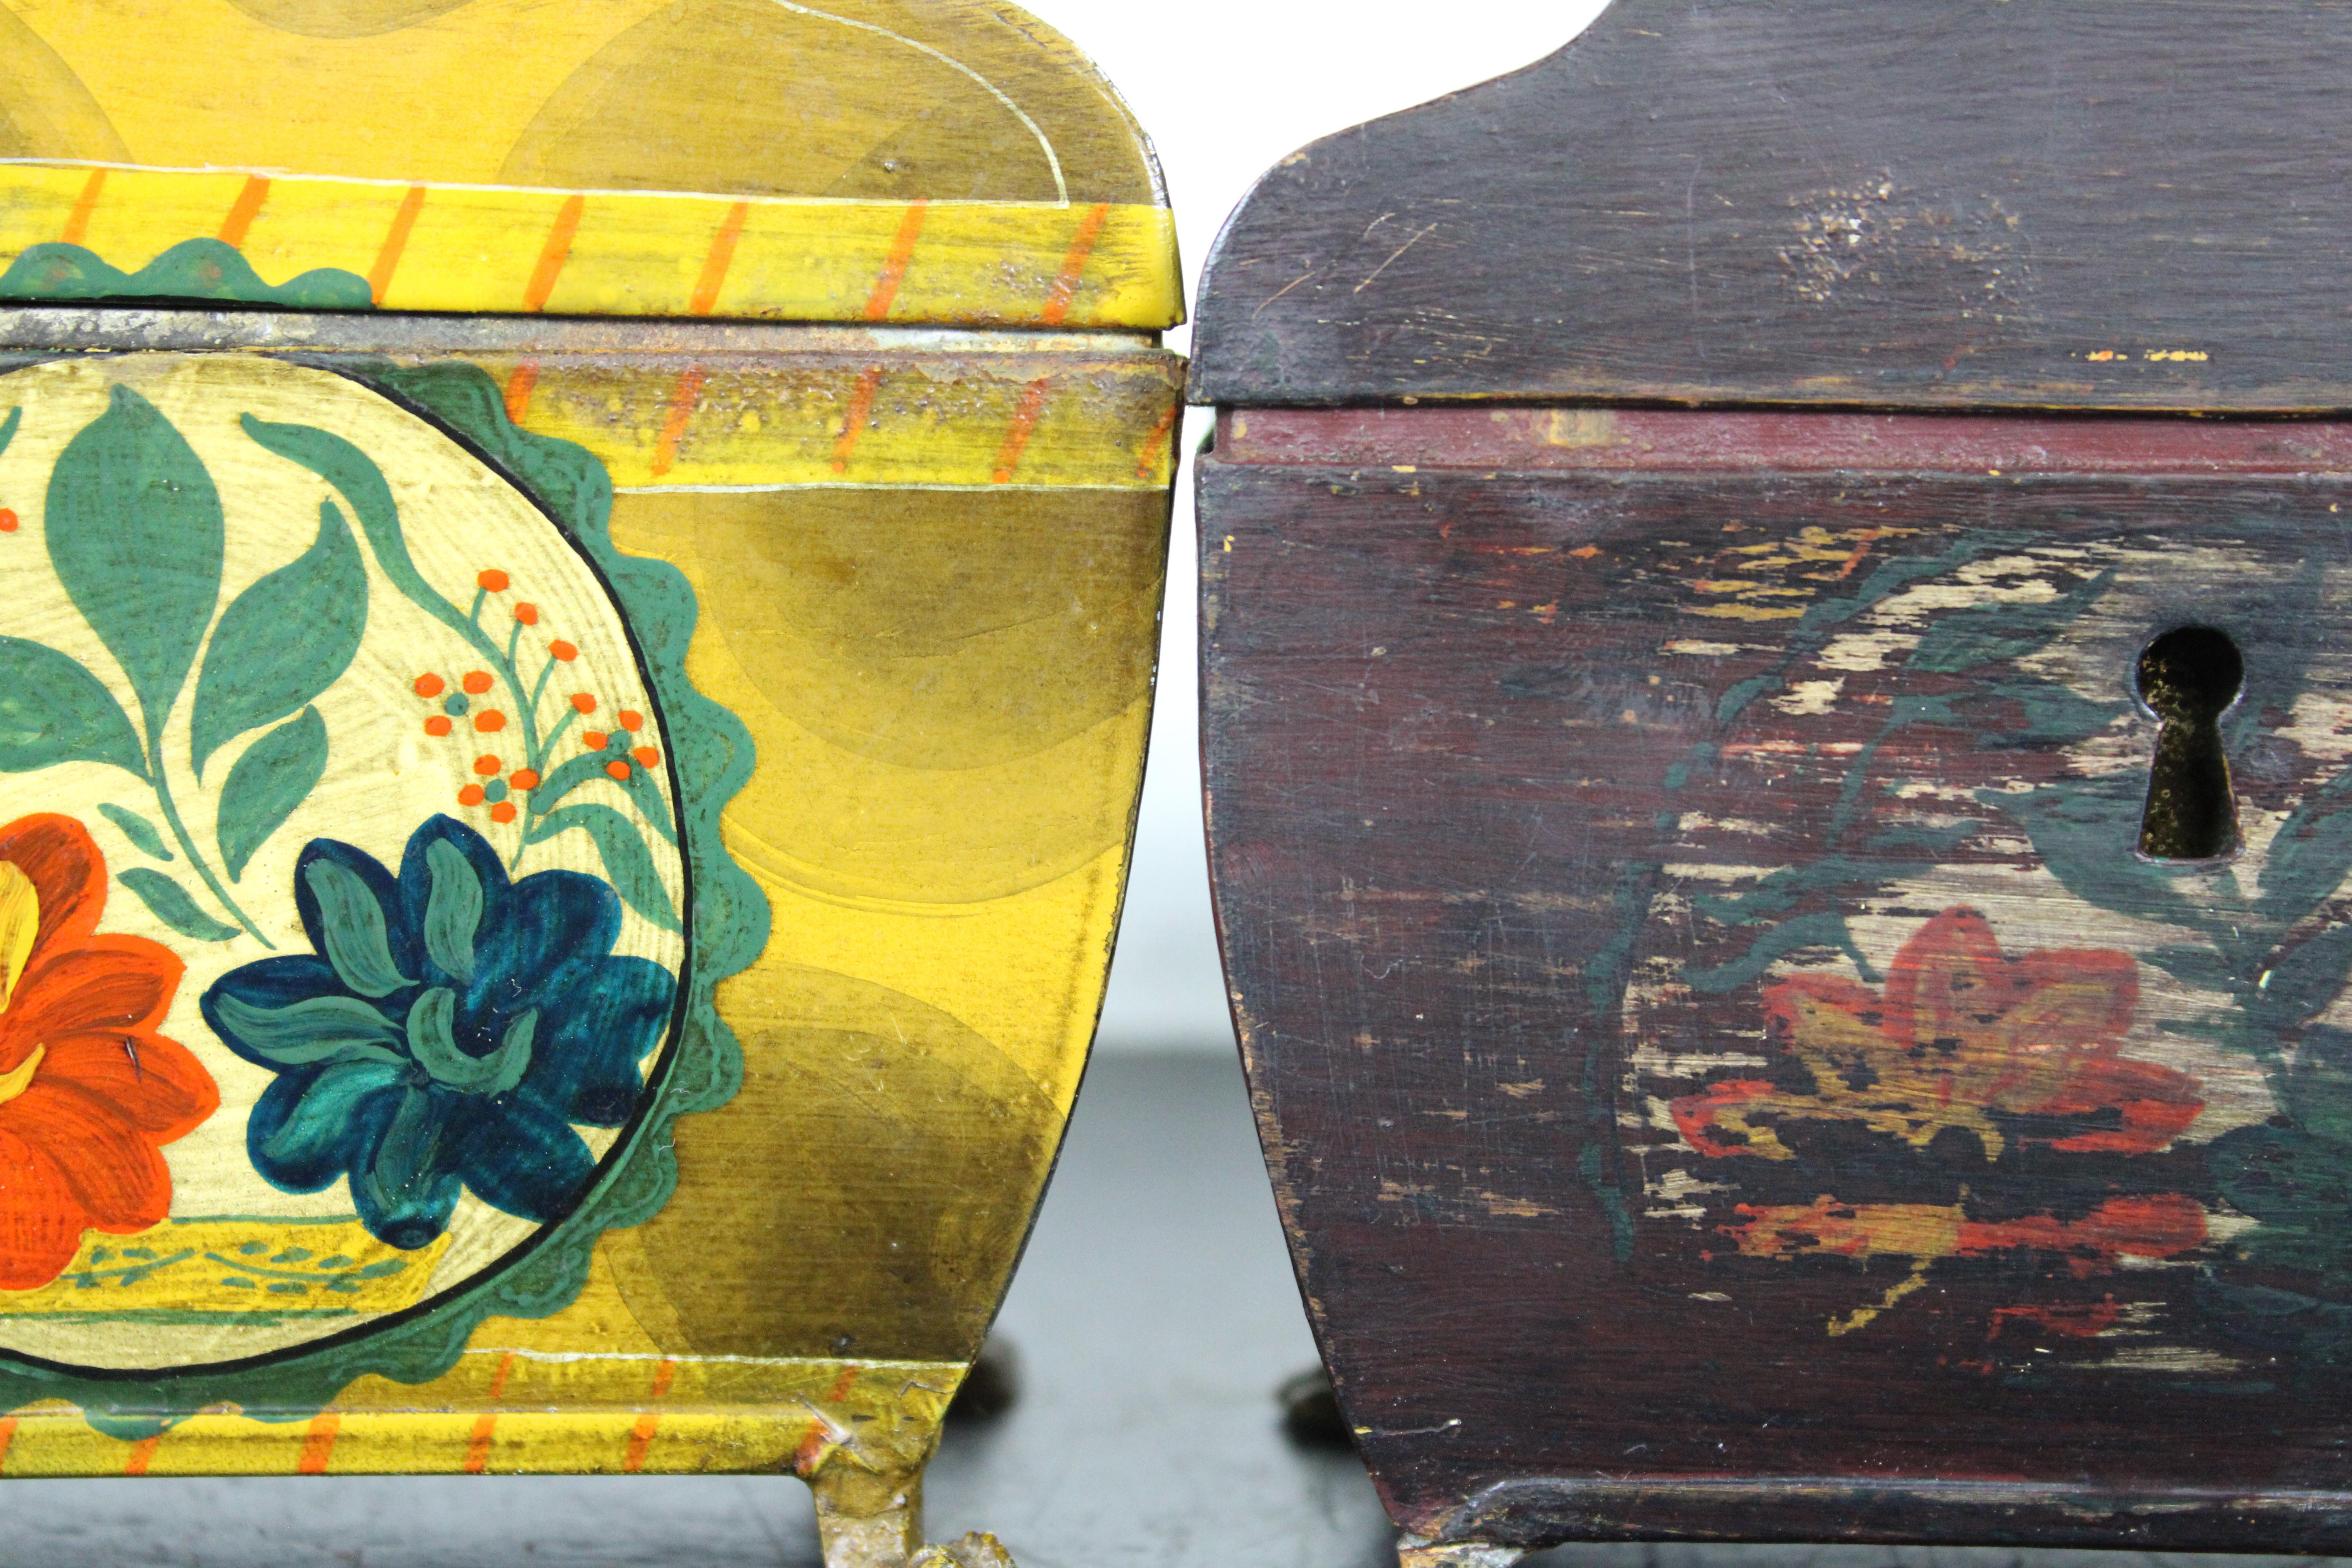 2 Vintage Italian Toleware Painted Metal Tea Caddy Footed Trinket Box Cannisters For Sale 4